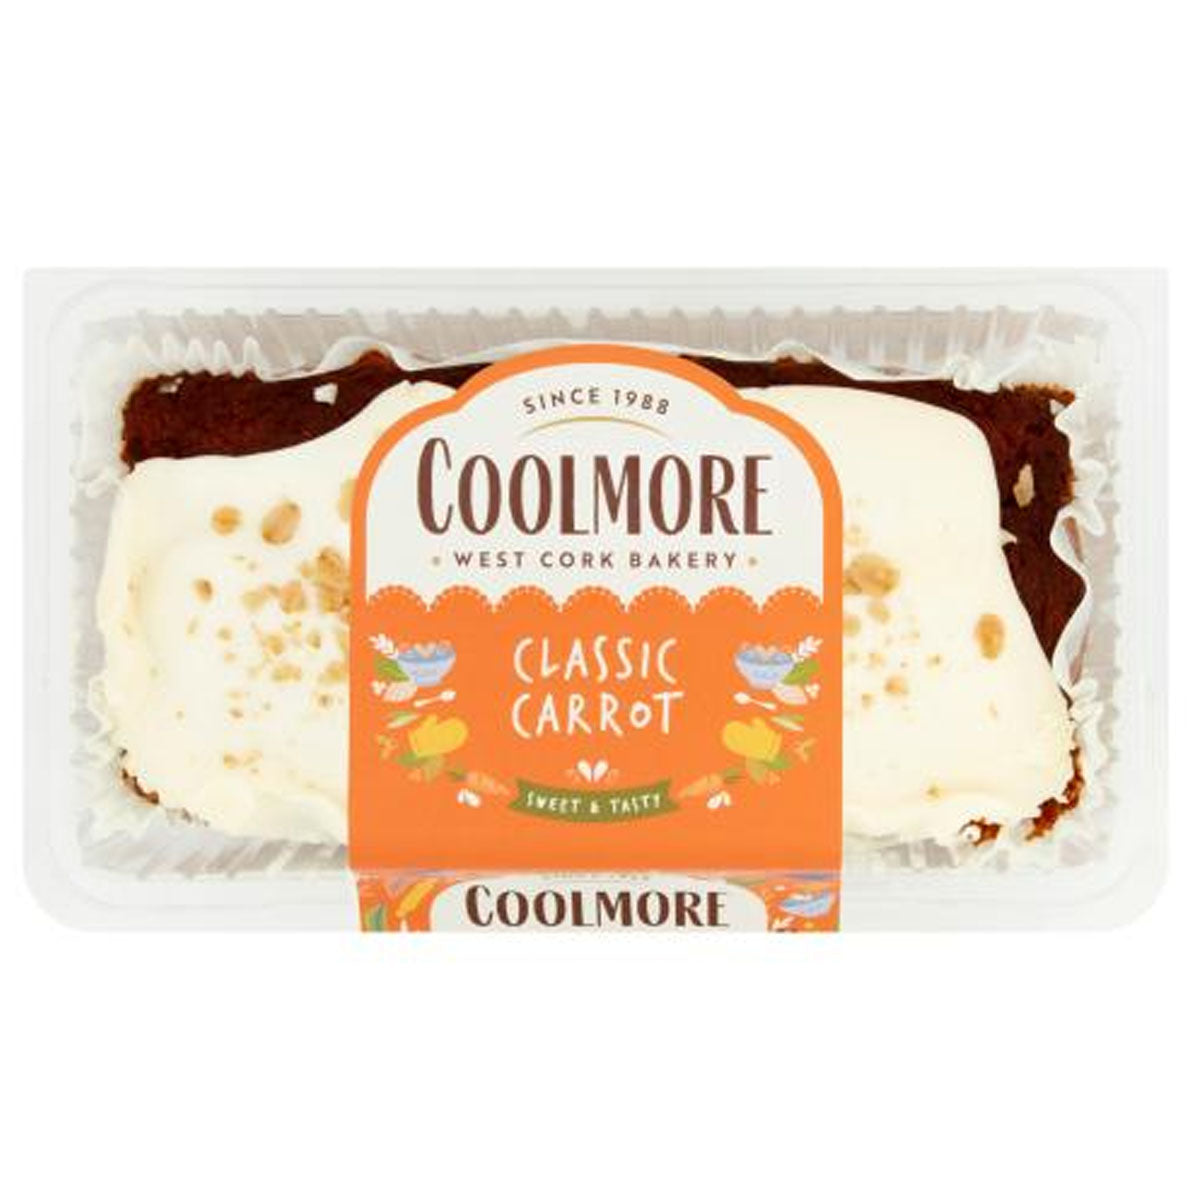 Coolmore - Classic Carrot Cake - 400g - Continental Food Store